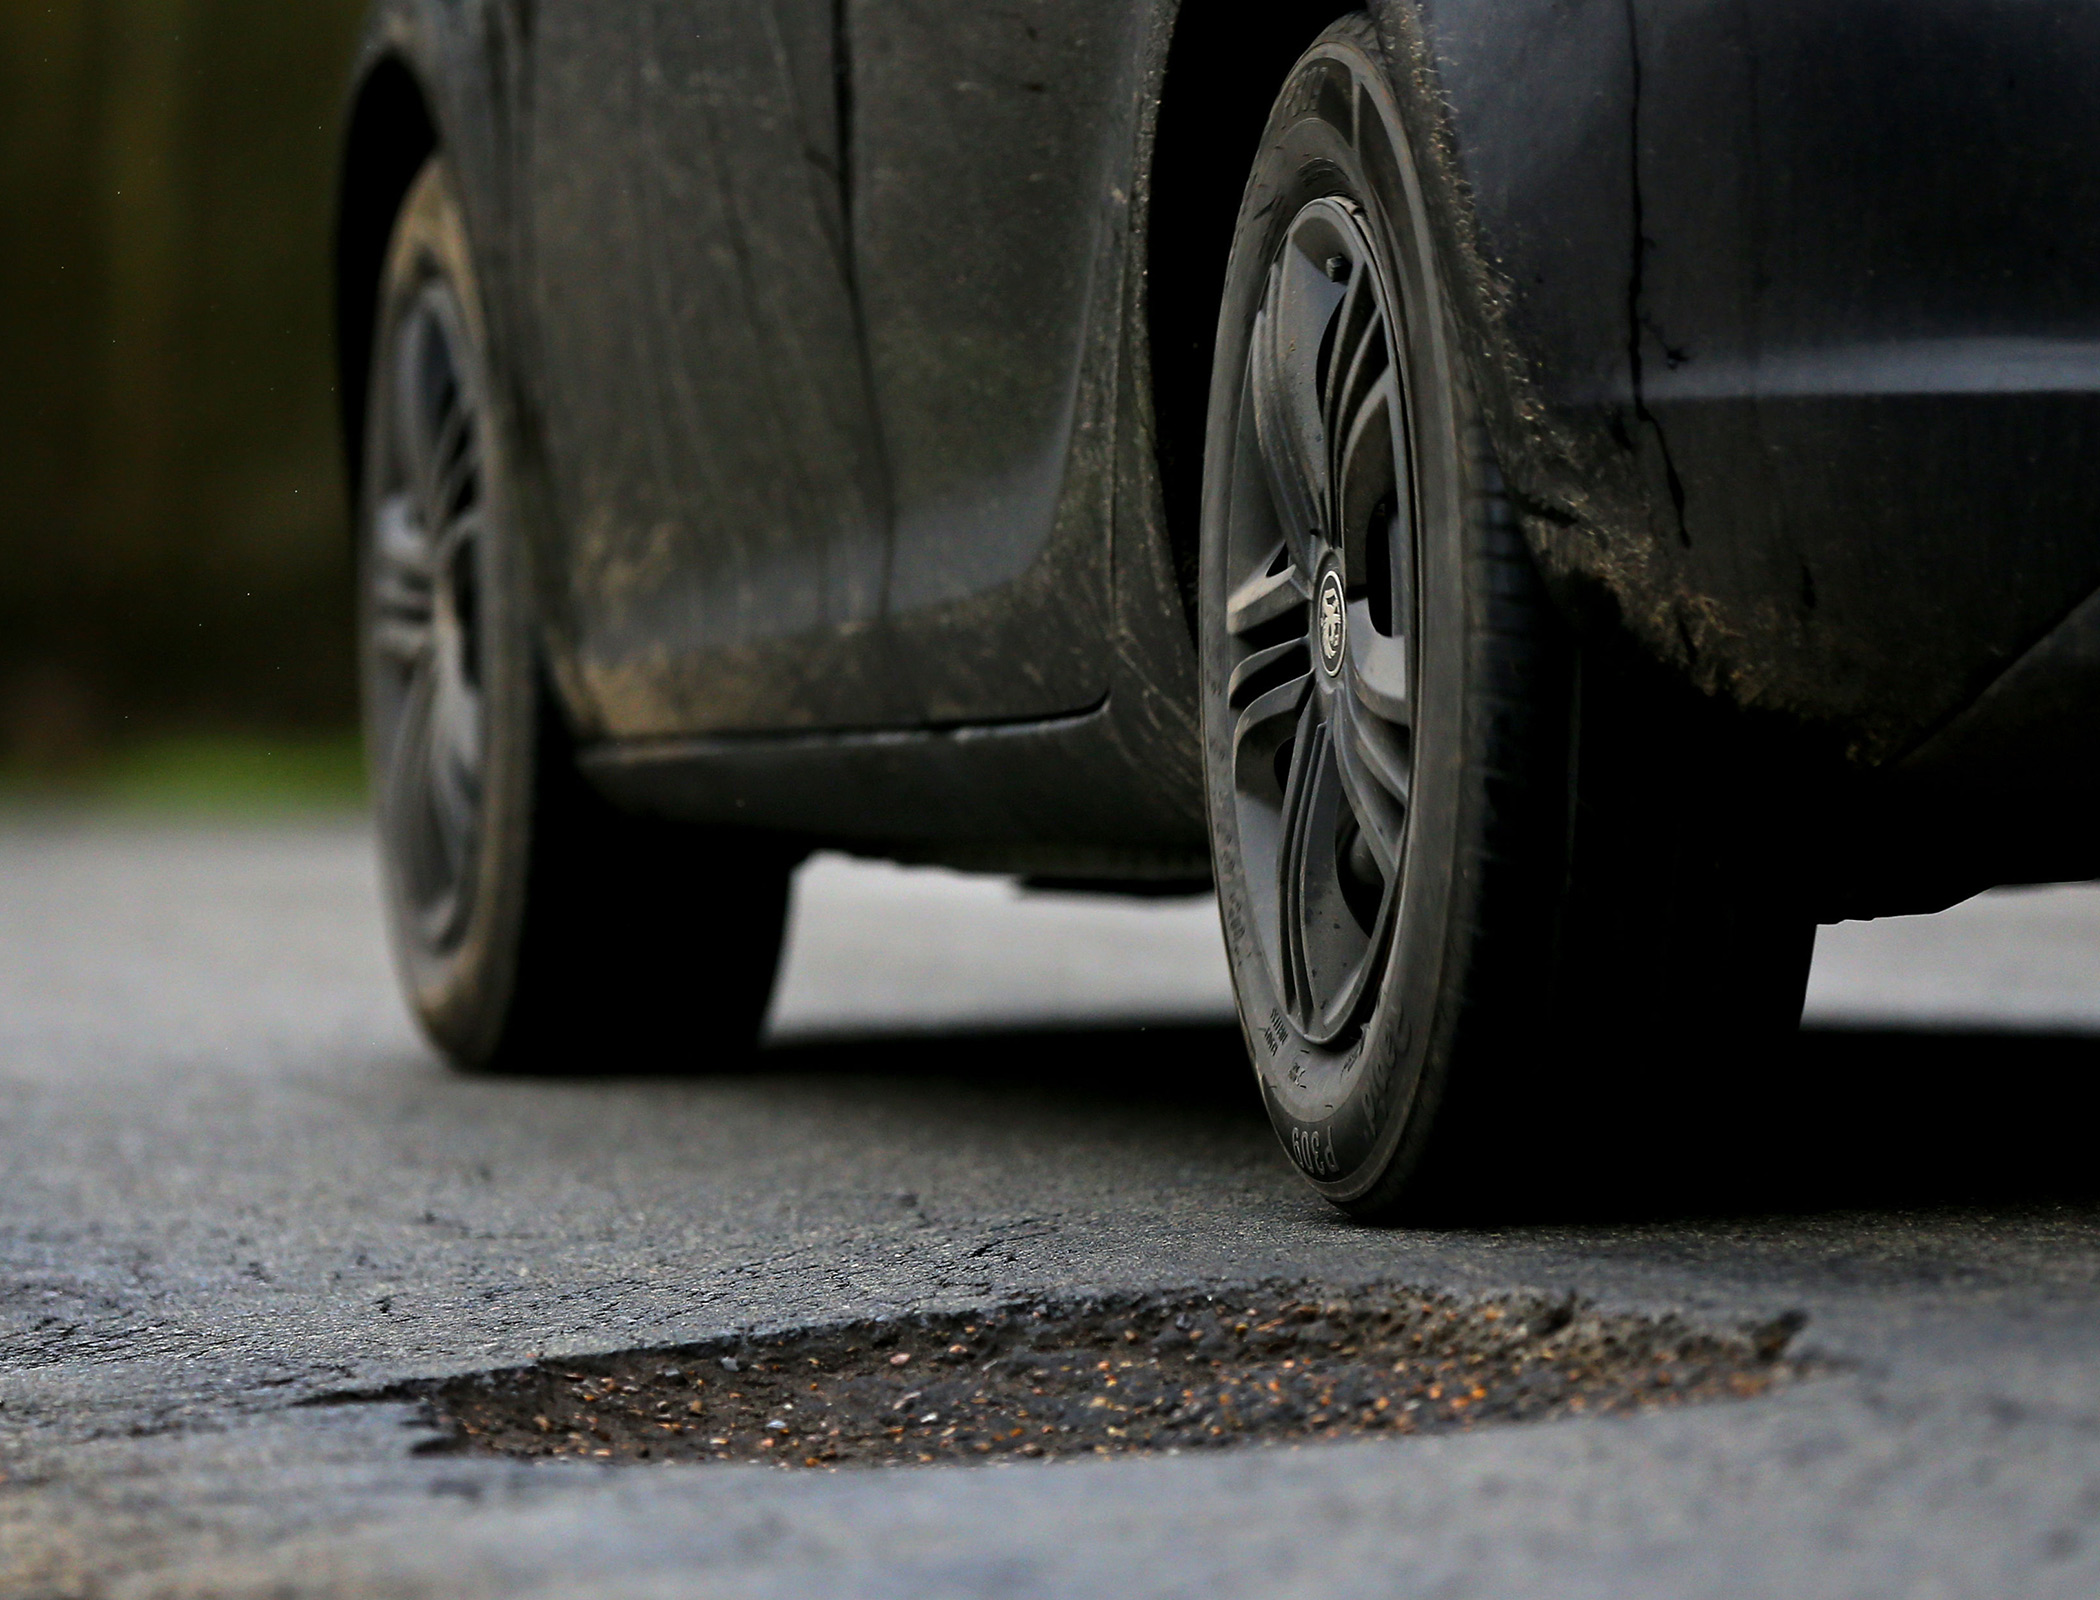 £14bn needed to tackle pothole backlog, report warns